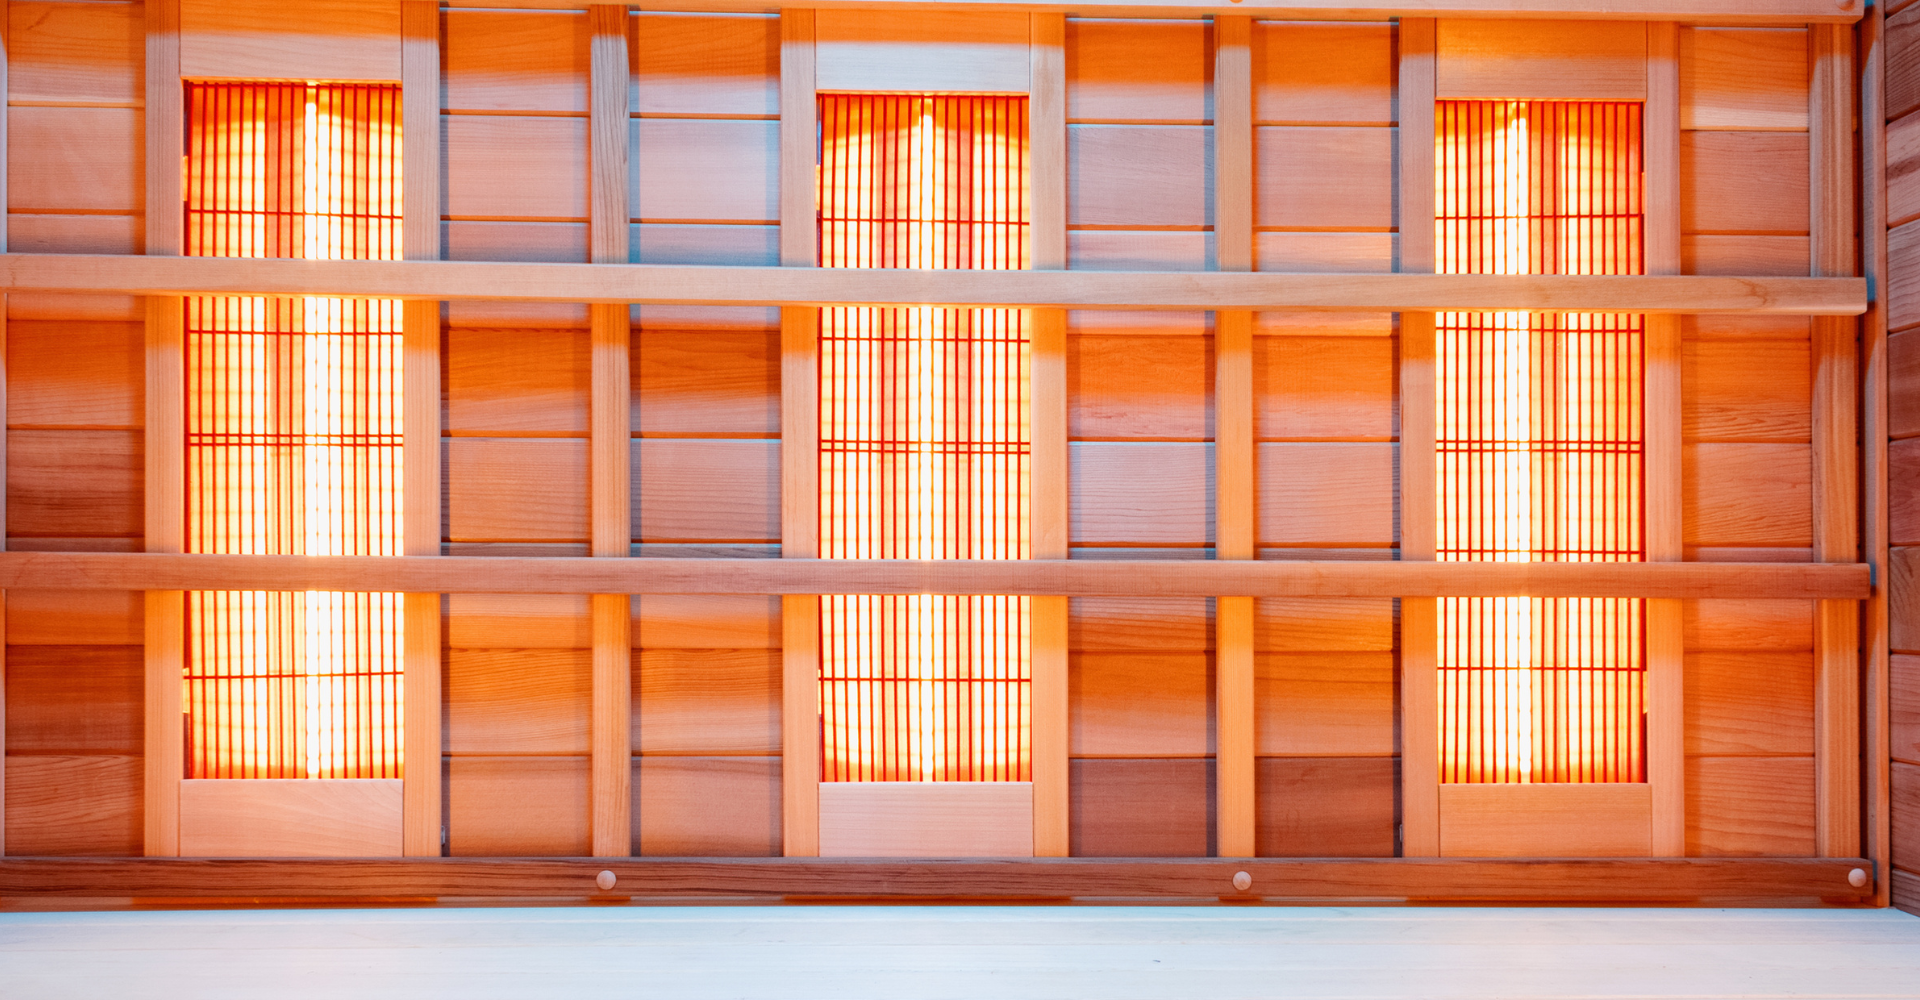 Why Would You Do Hot Yoga in an Infrared Sauna?